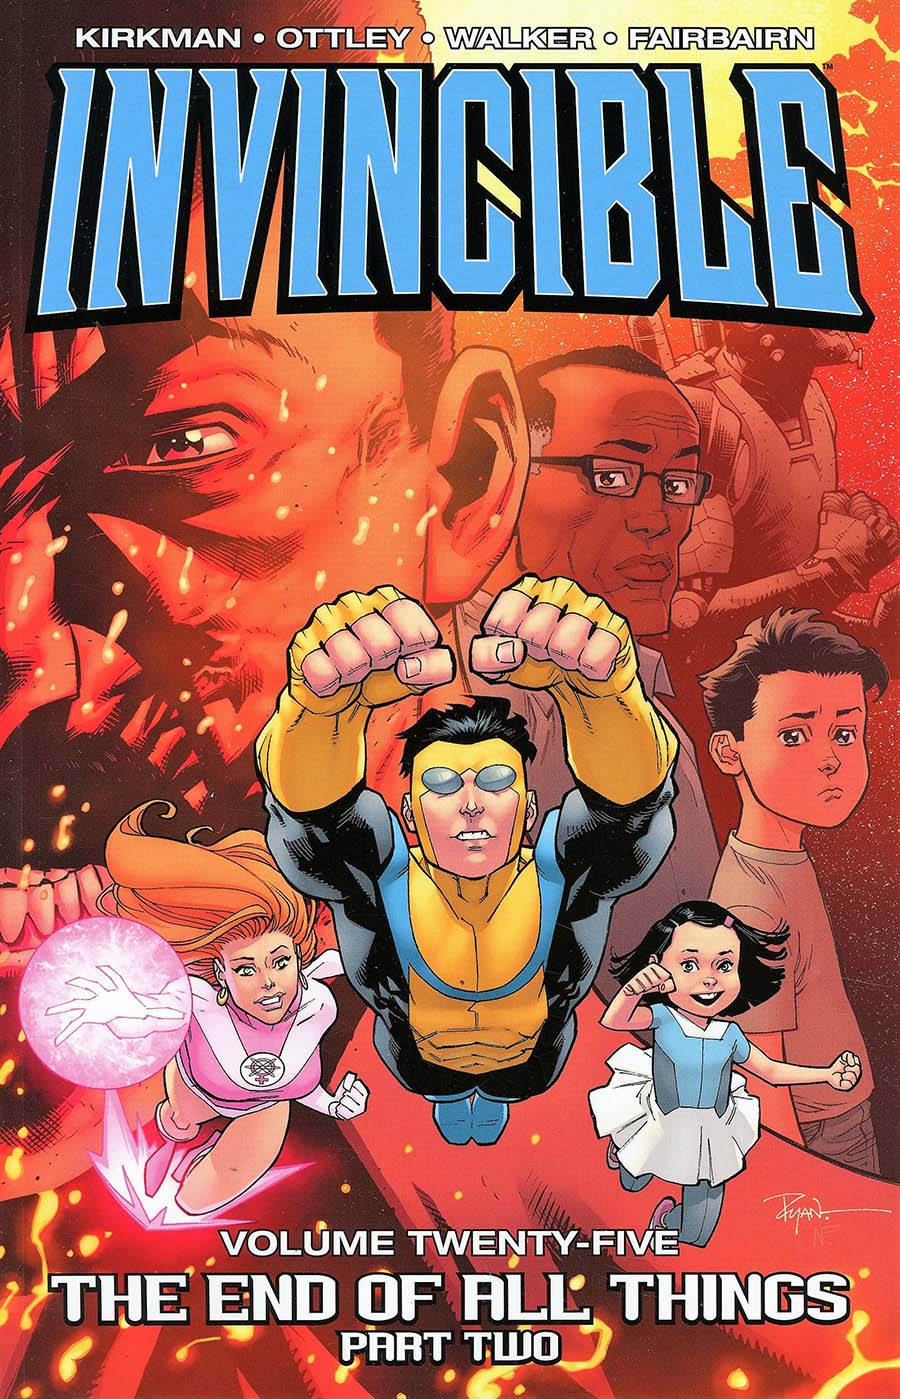 Invincible Vol 25 The End Of All Things Part 2 TP